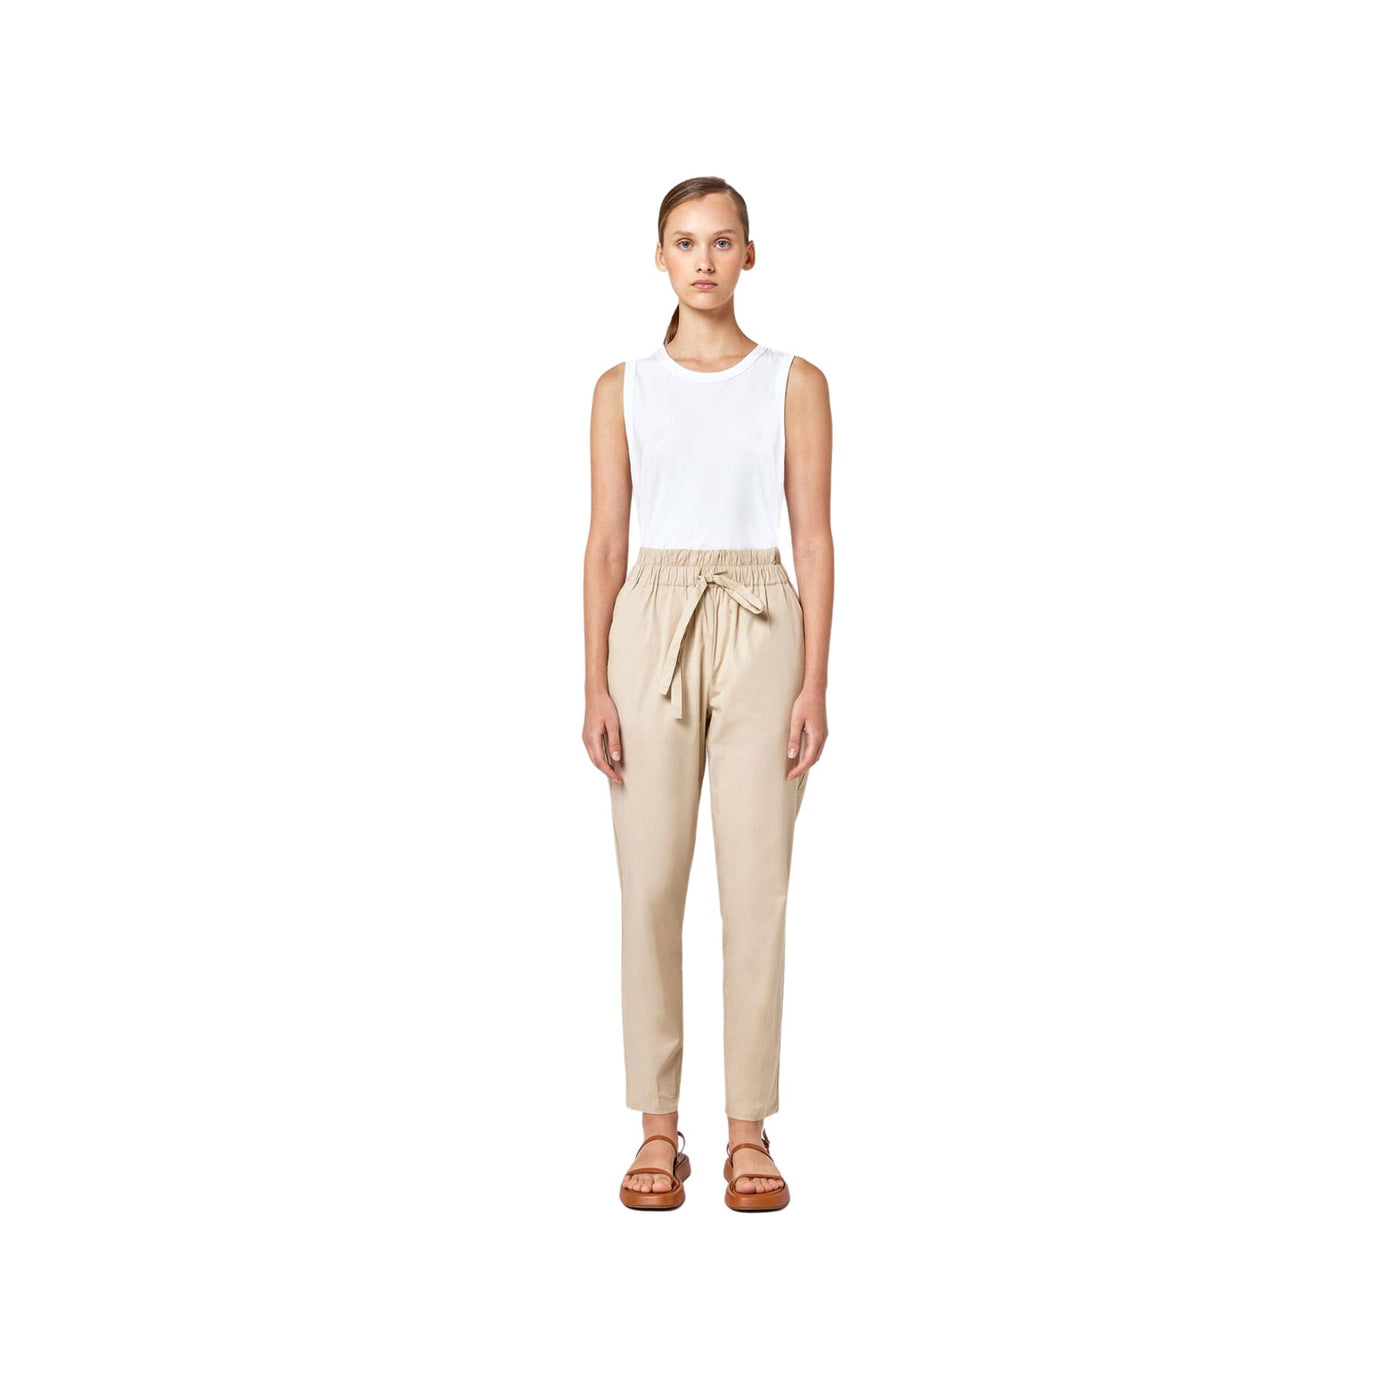 Women's trousers with drawstring waist